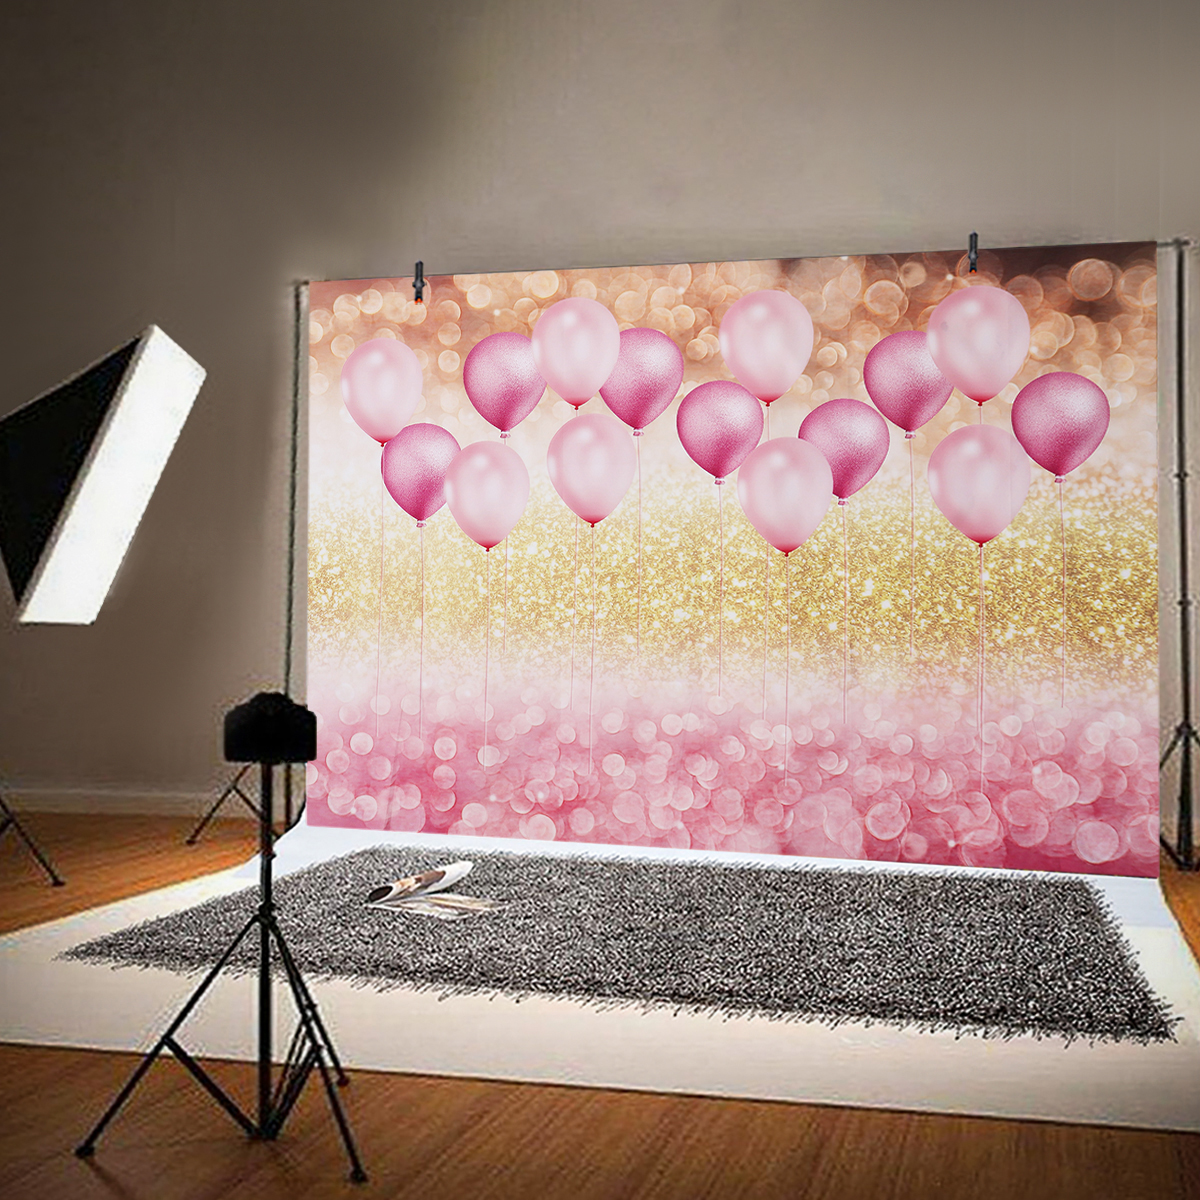 Little-Baby-Birthday-Party-Theme-Backdrops-Photography-Photo-Booth-Studio-Background-Party-Home-Deco-1748939-9